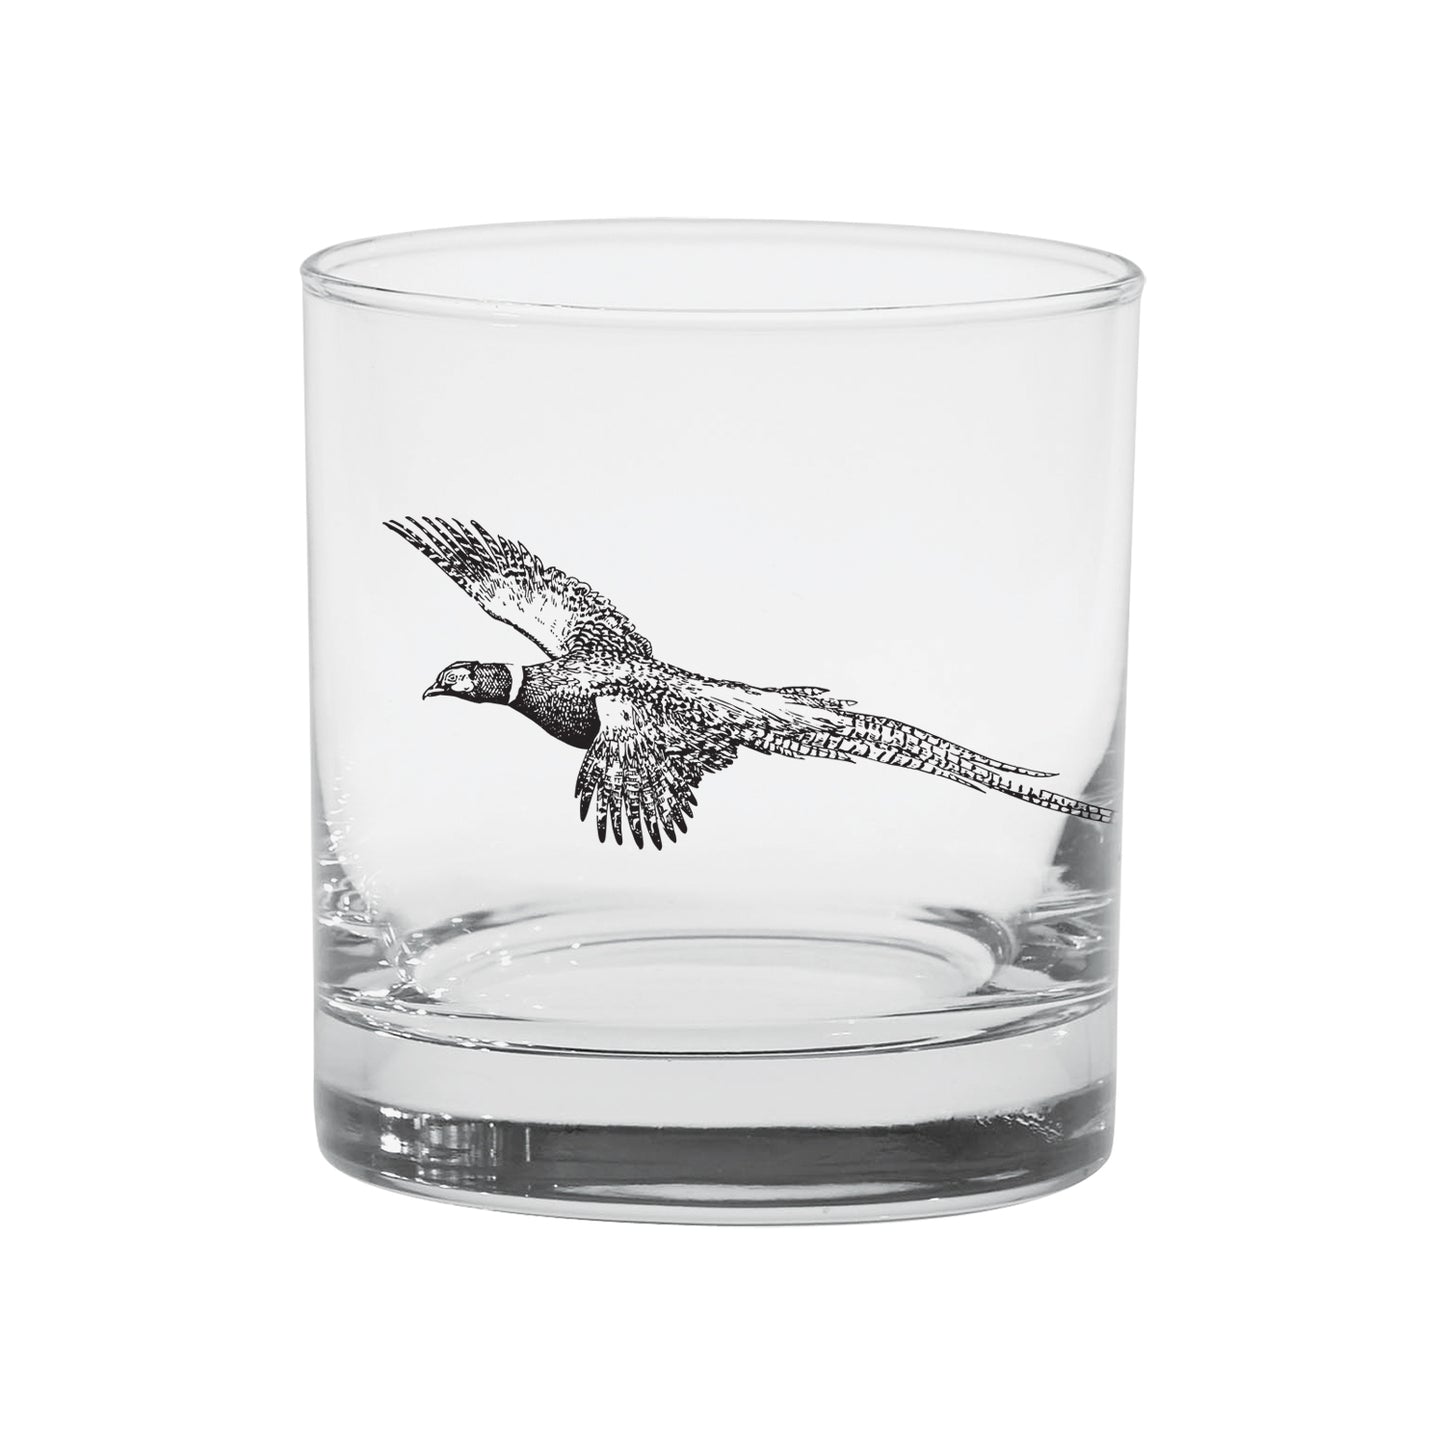 A lowball cocktail glass has a black and white drawing of a pheasant